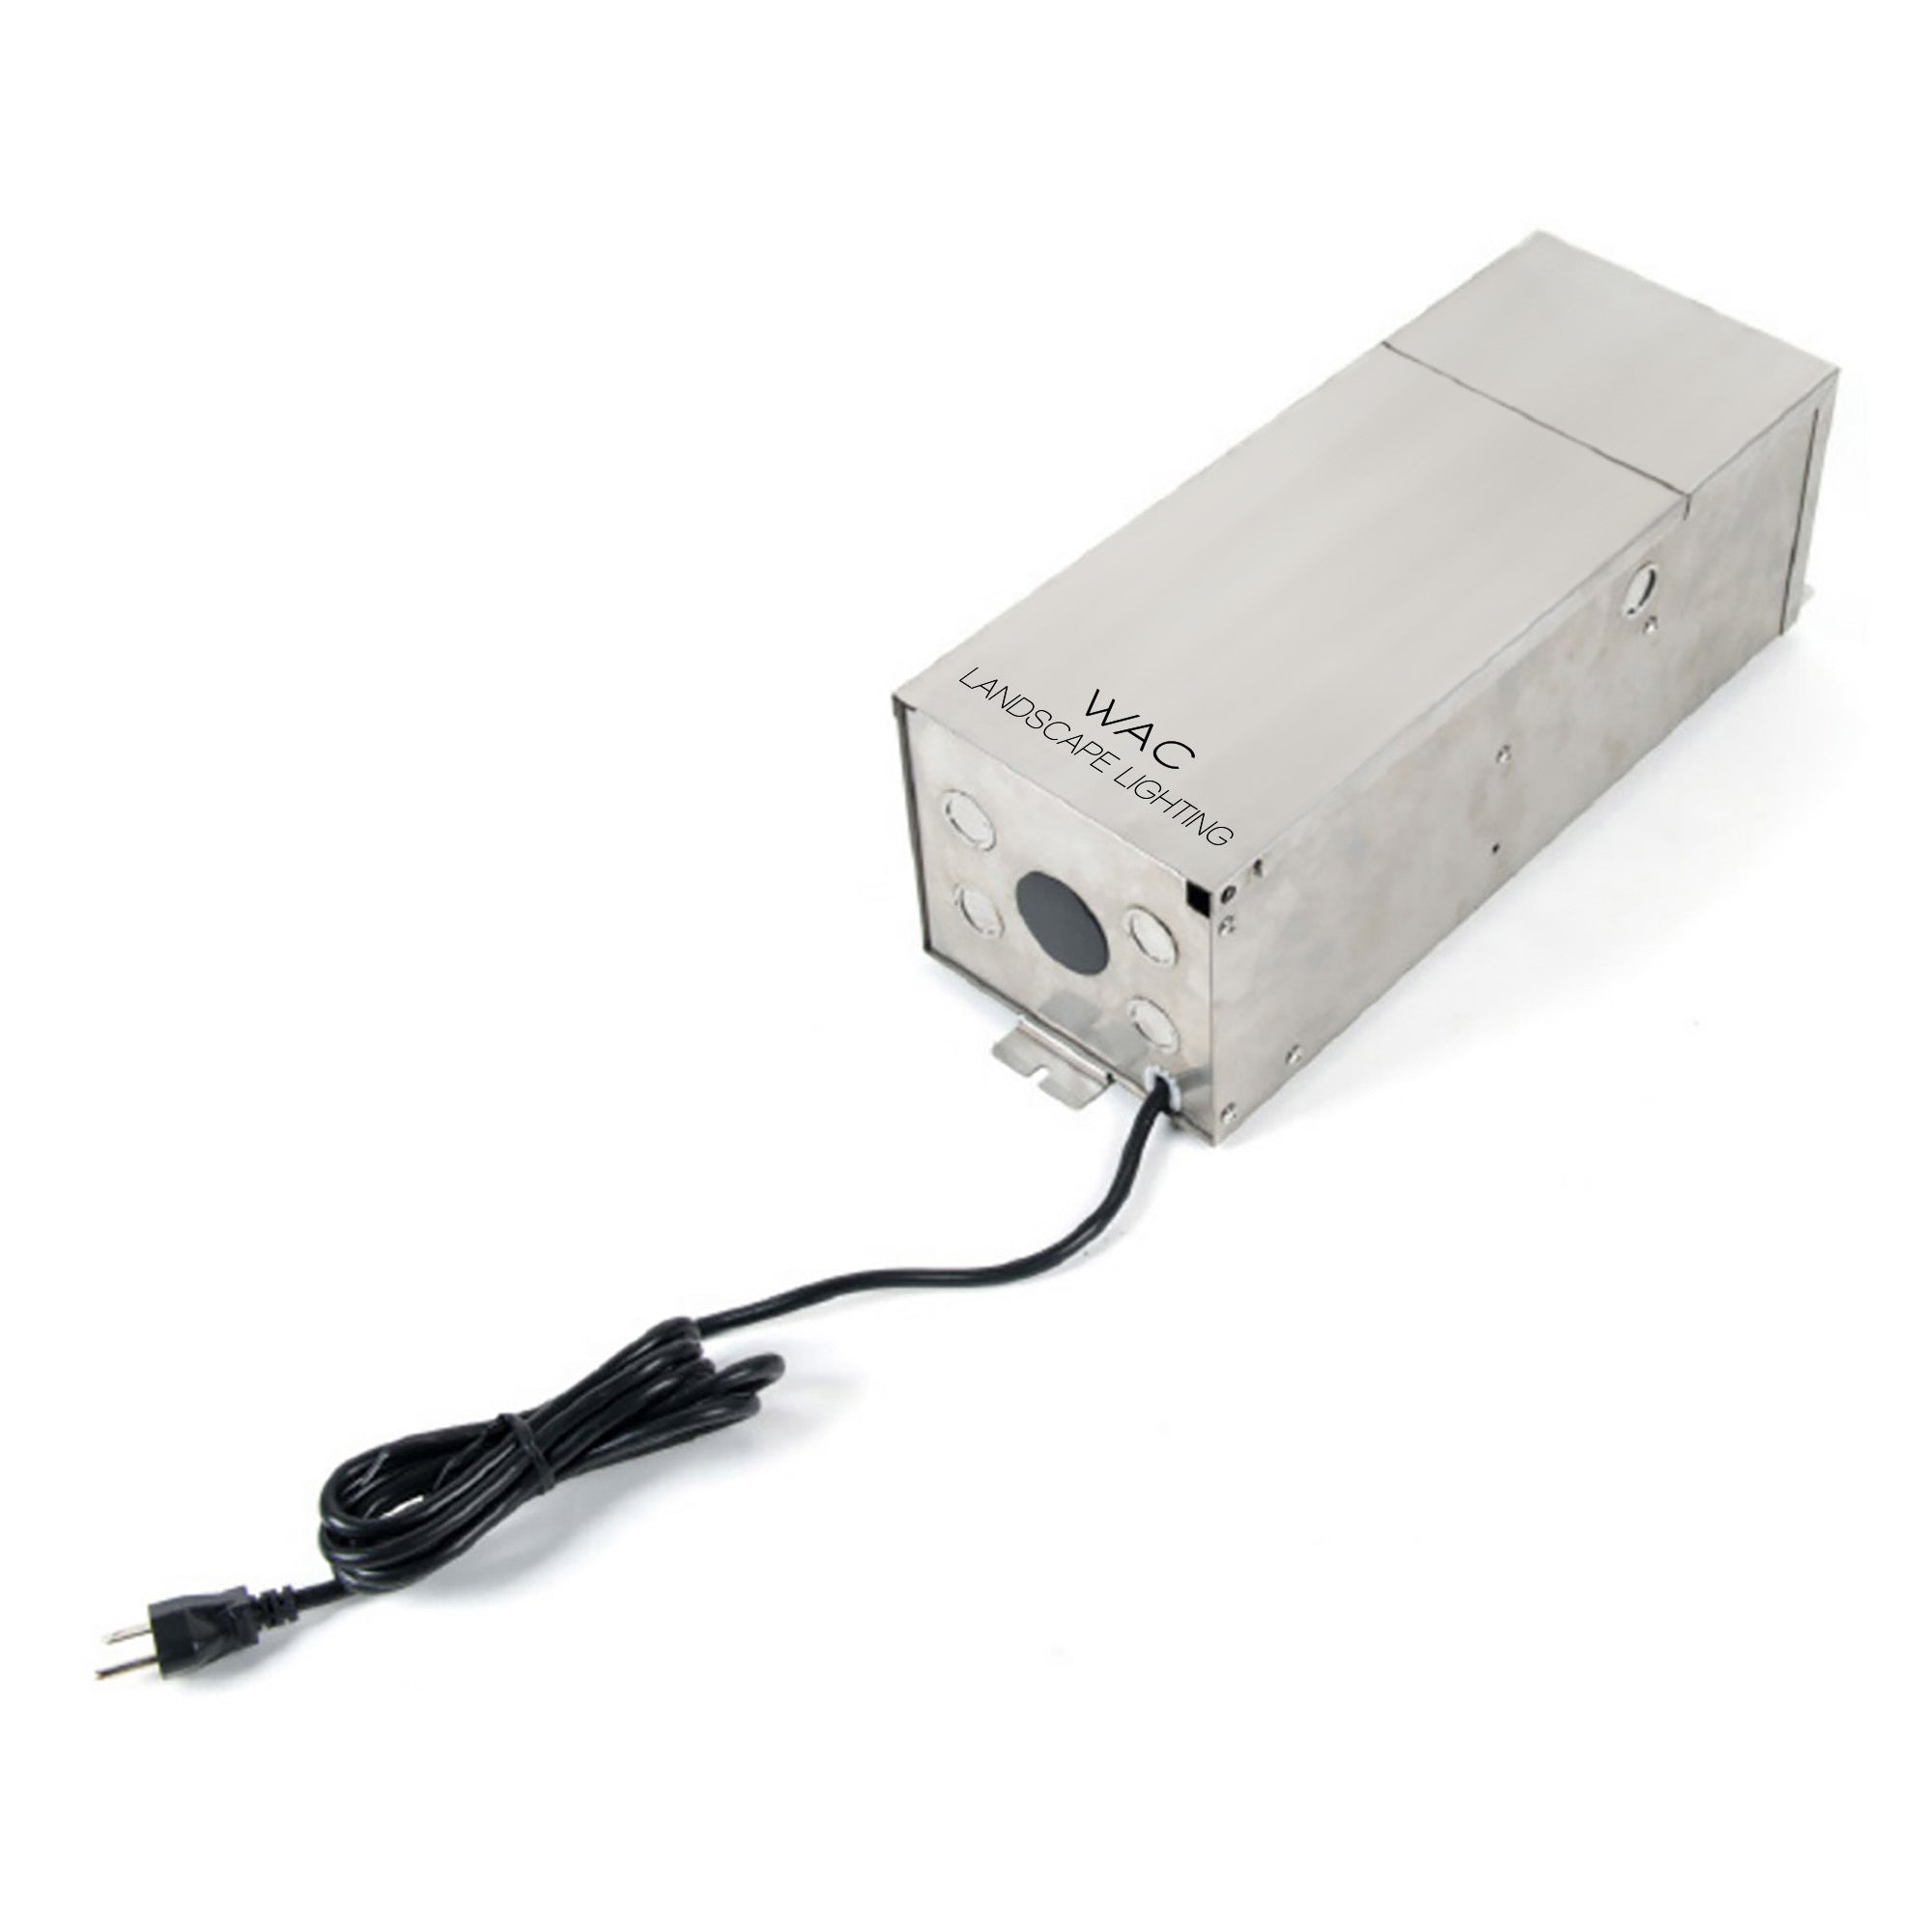 300W Stainless Steel Outdoor Landscape Lighting Magnetic Power Supply